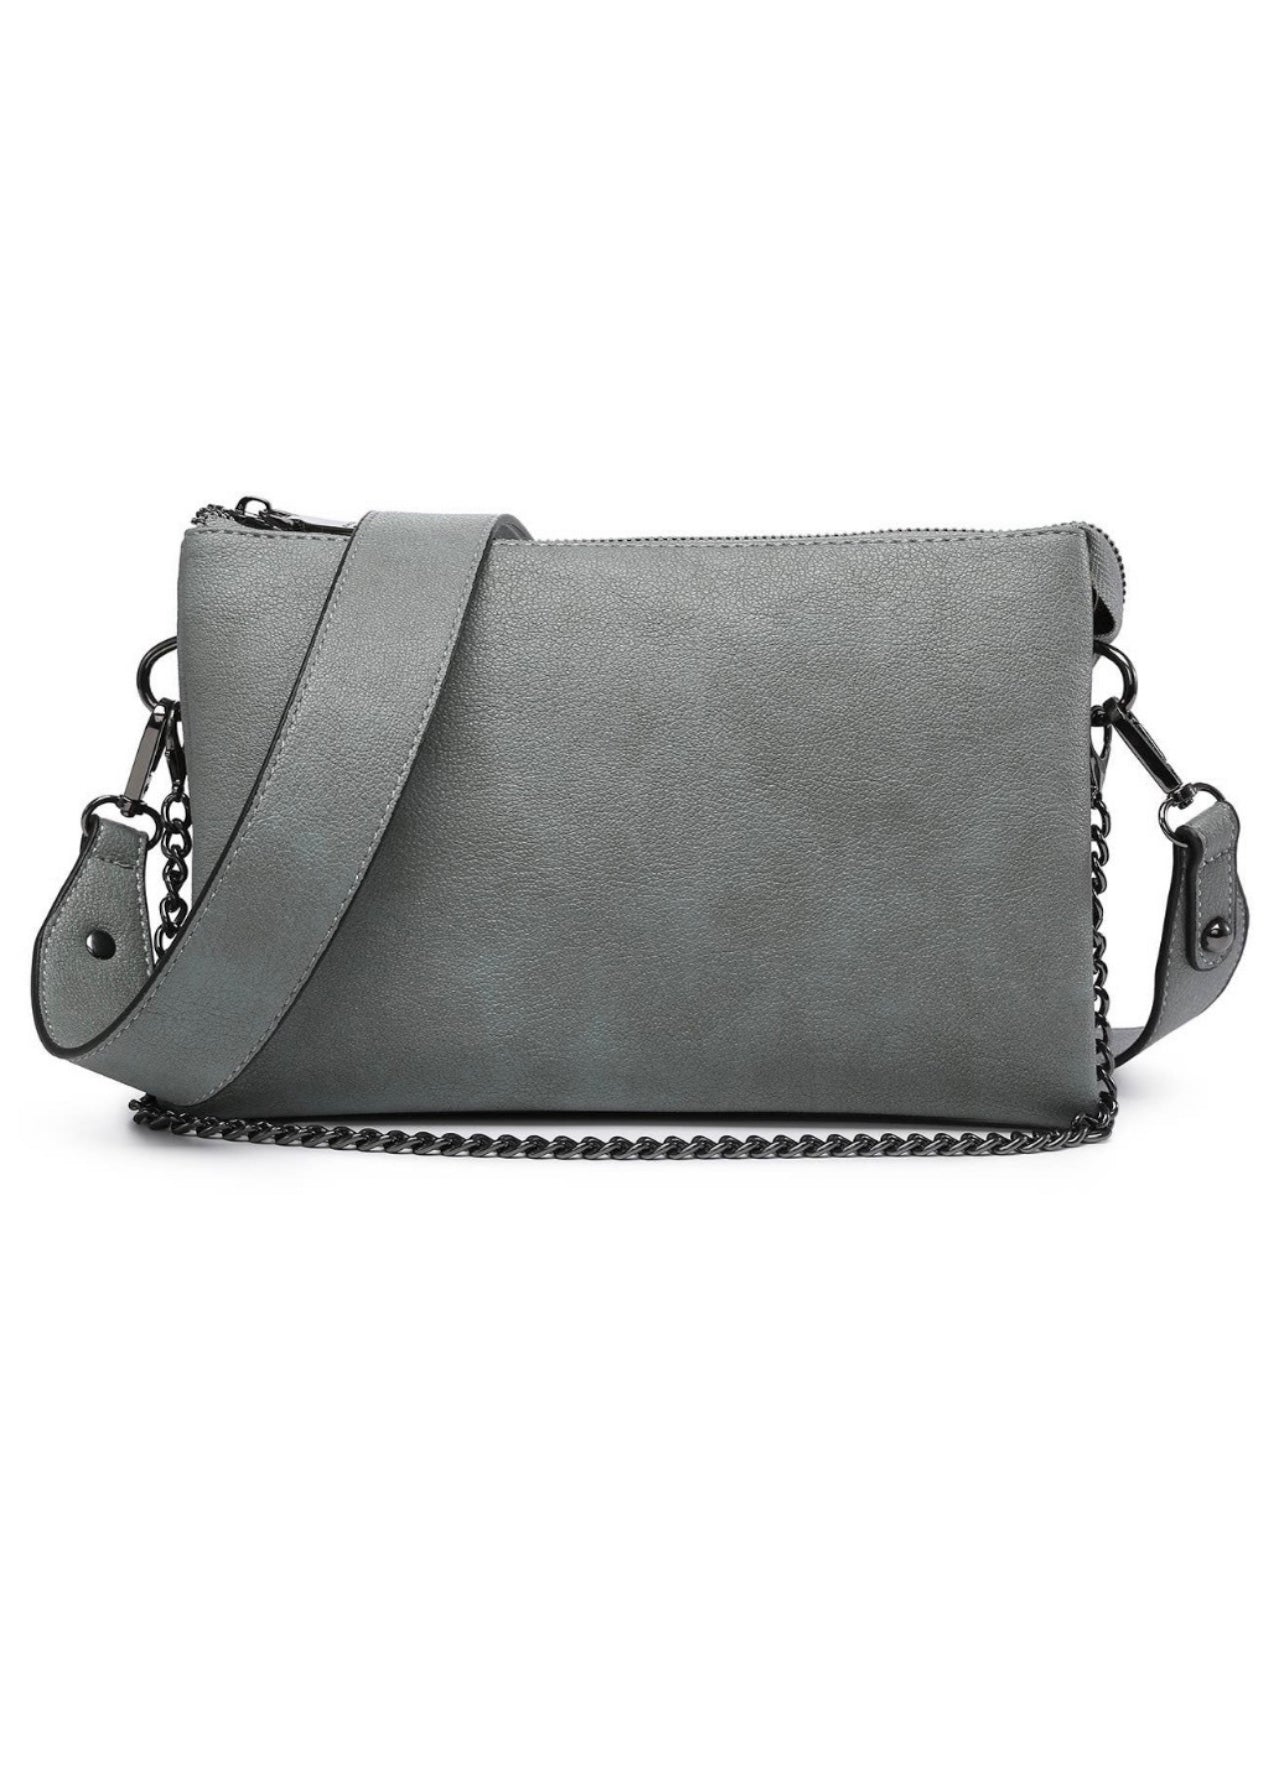 Earth Gray vegan leather crossbody purse with  2 removable straps. One strap is gun metal chain and the other is a vegan leather crossbody. Purse is 10 x 7 x 2 and had 3 compartments inside. 